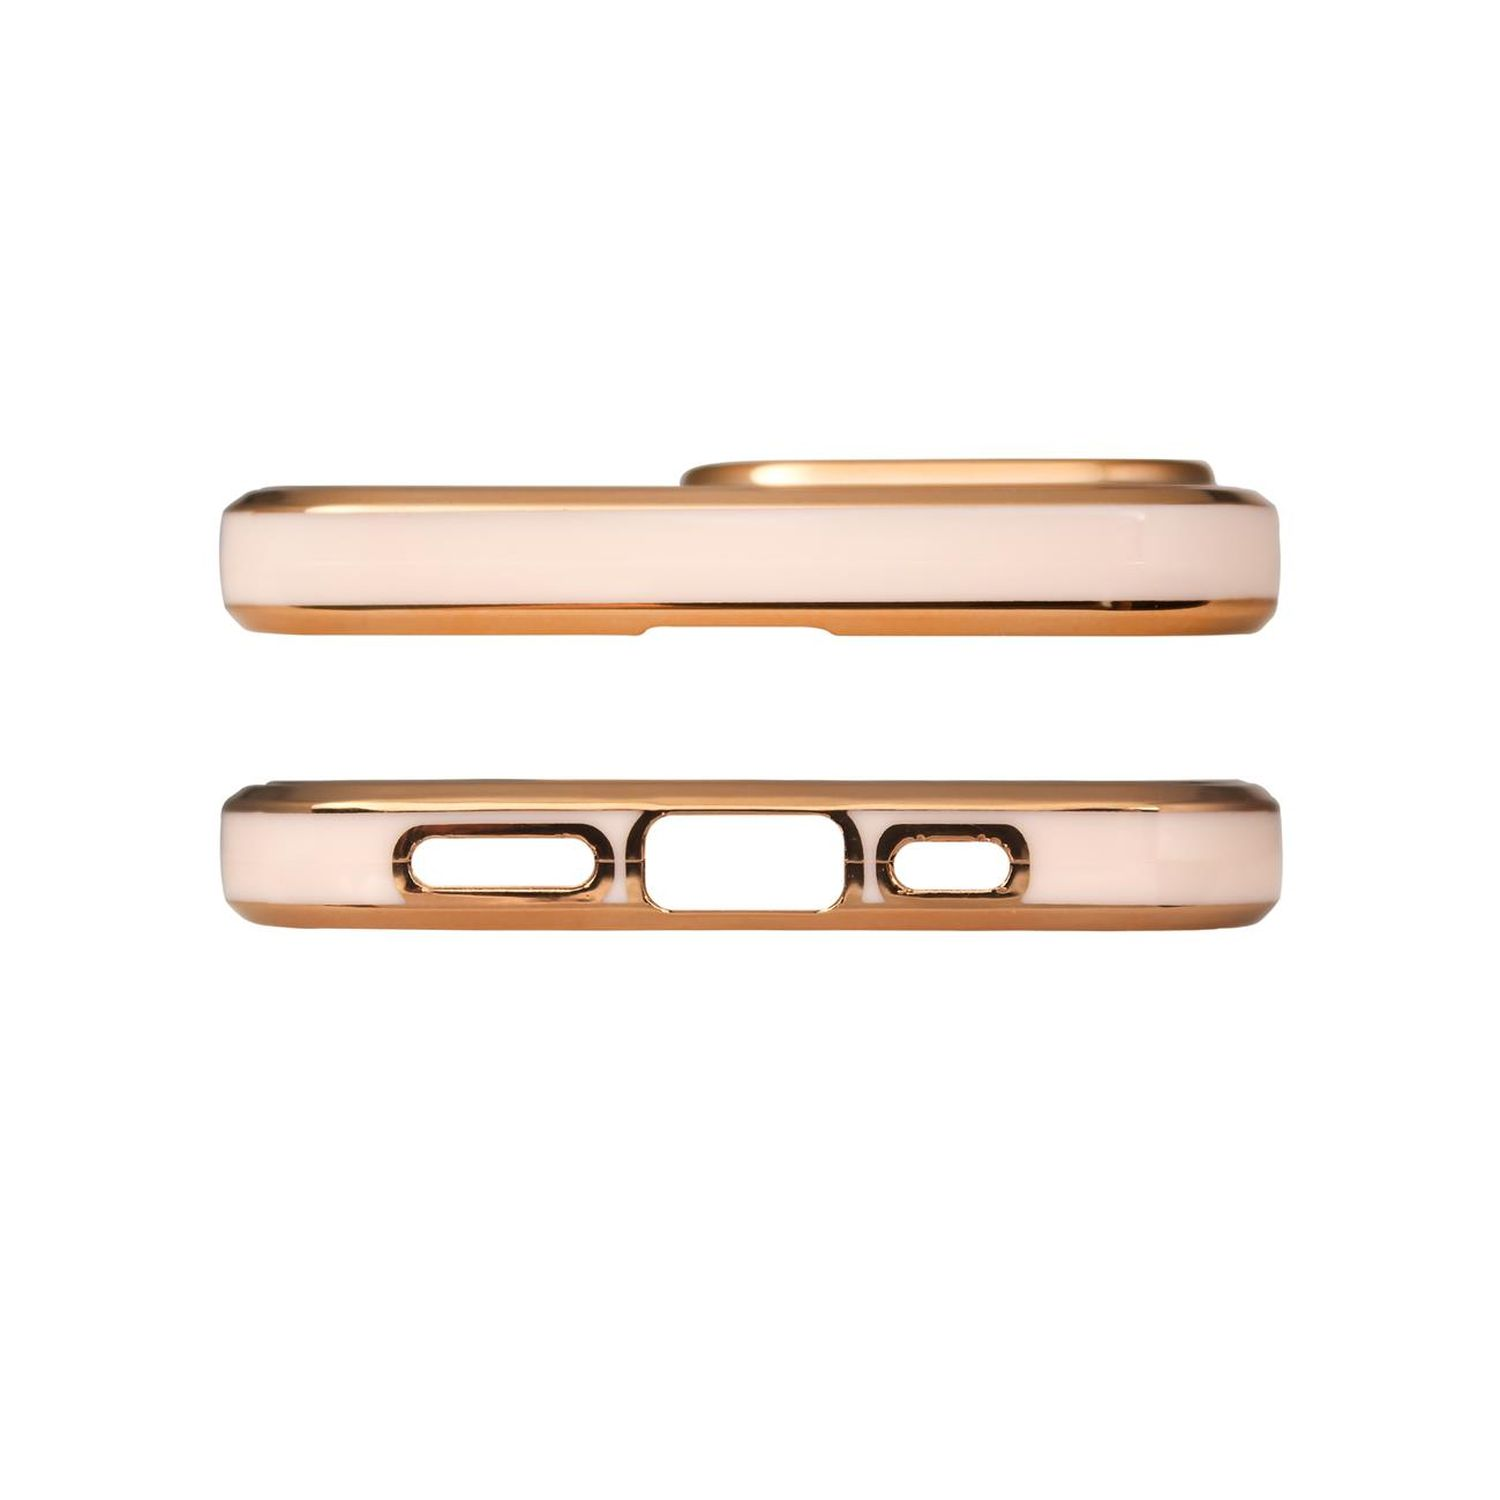 COFI Lighting Color Case, Backcover, iPhone 13 Max, Apple, Pink-Gold Pro